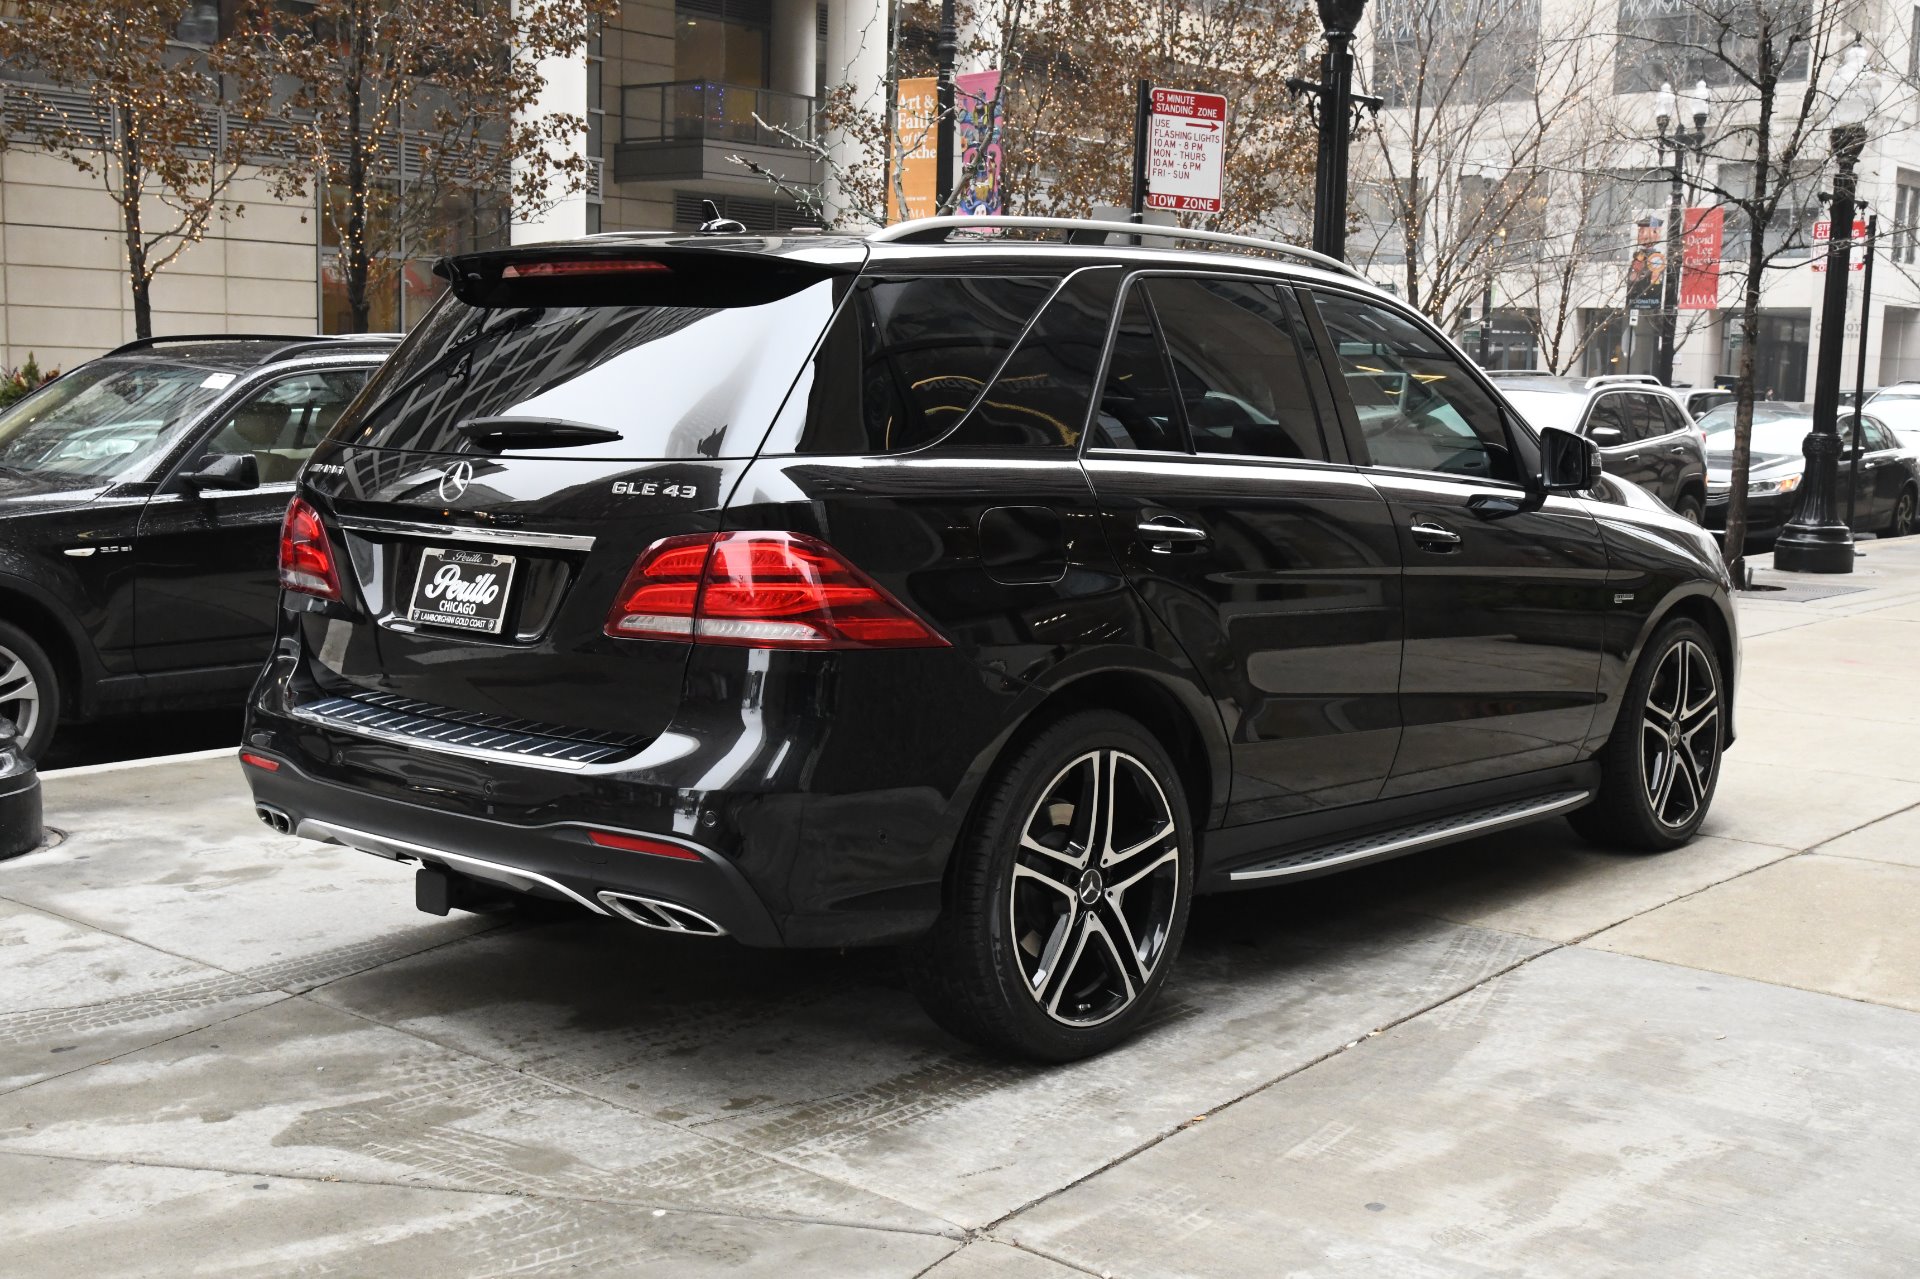 2018 Mercedes-Benz GLE AMG GLE 43 Stock # M672A for sale near Chicago, IL |  IL Mercedes-Benz Dealer